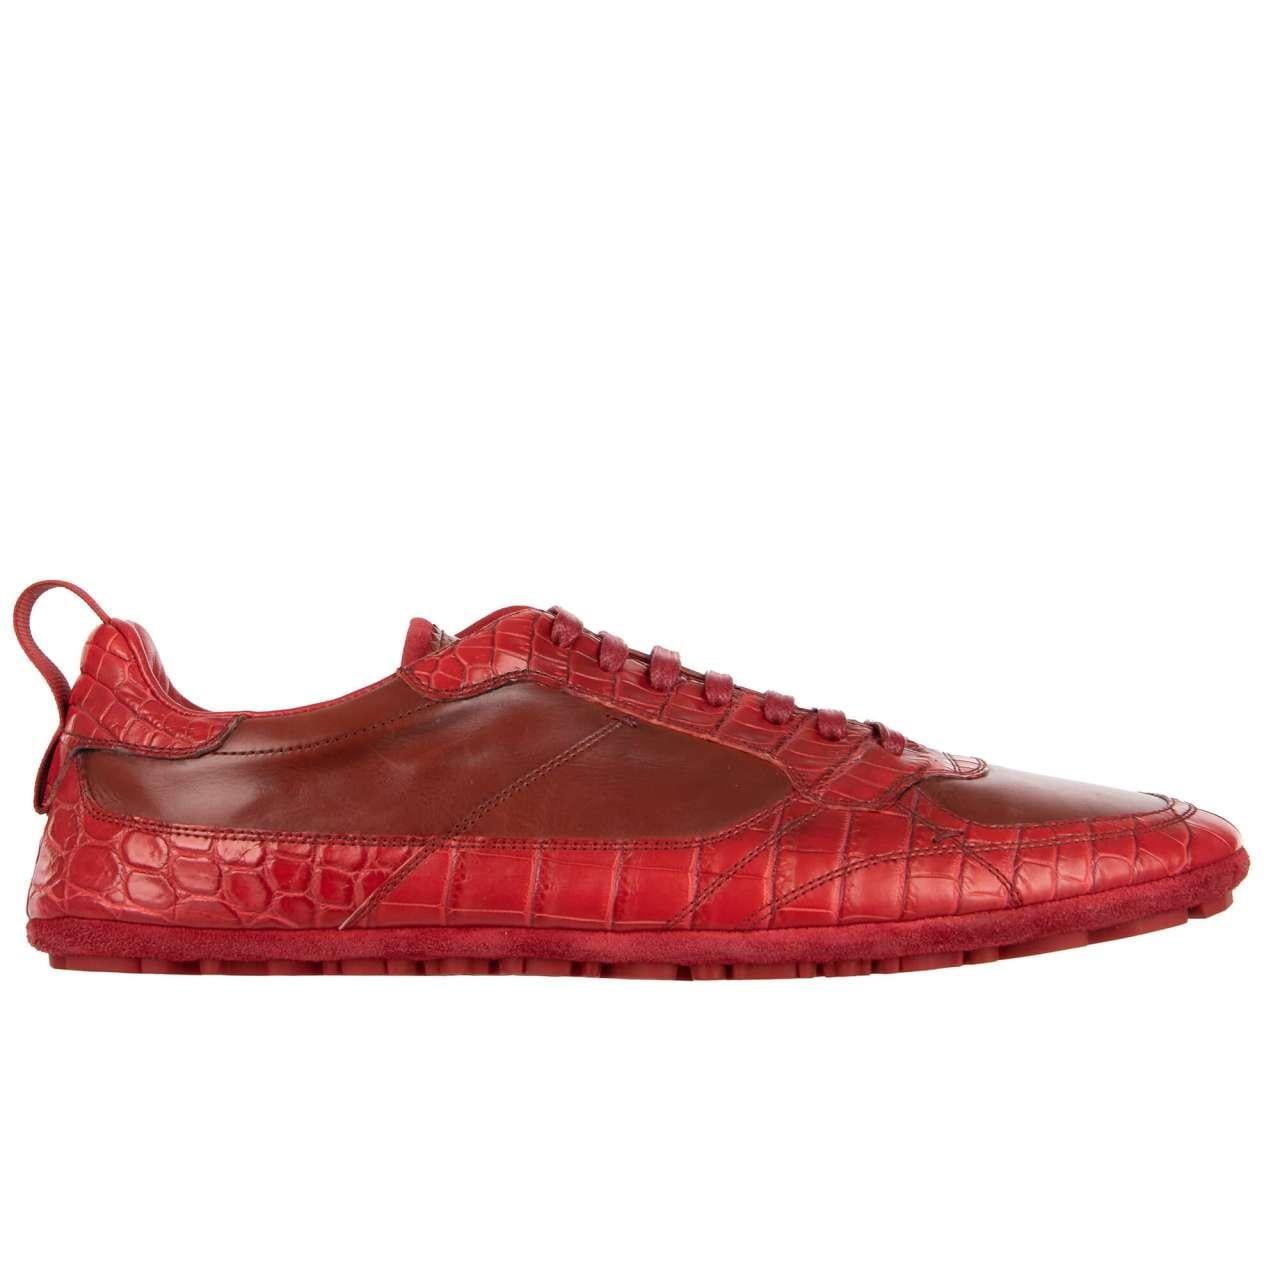 Dolce & Gabbana Low-Top Croco Sneaker KING DRIVER with Crown Red 44 UK 10 For Sale 1